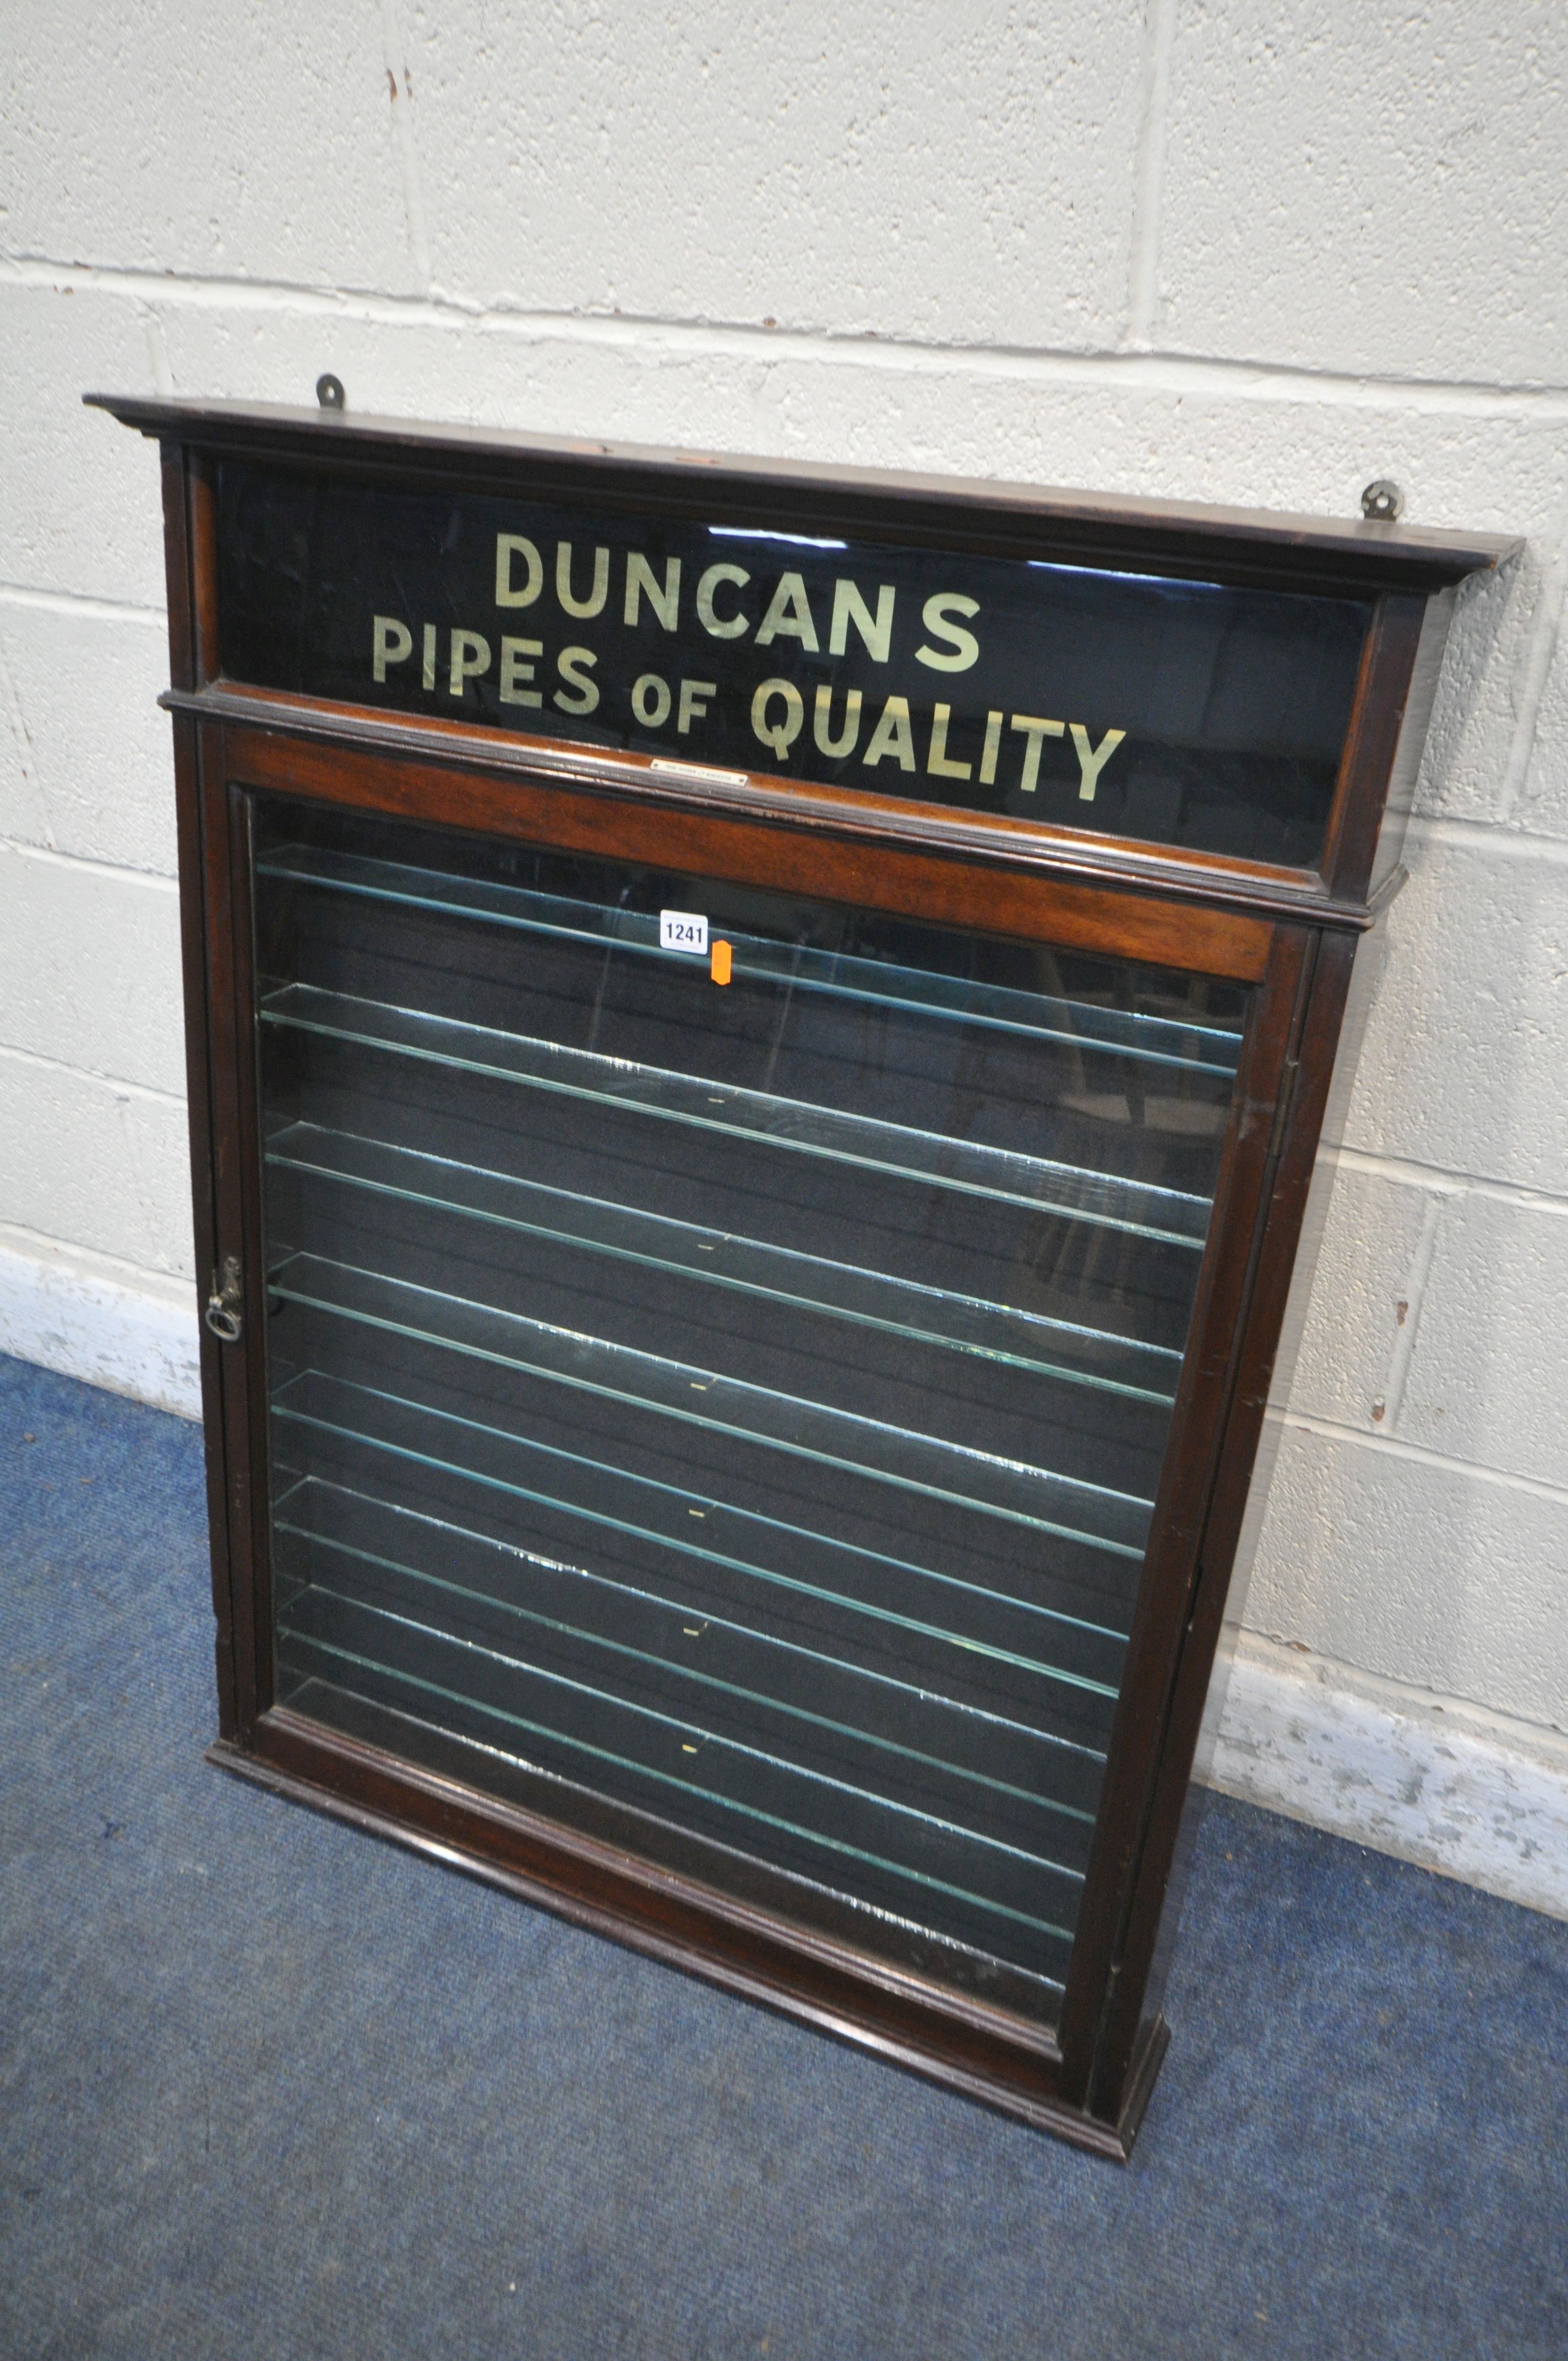 AN EARLY 20TH CENTURY MAHOGANY SINGLE DOOR DUNCAN'S PIPES OF QUALITY DISPLAY CASE, enclosing seven